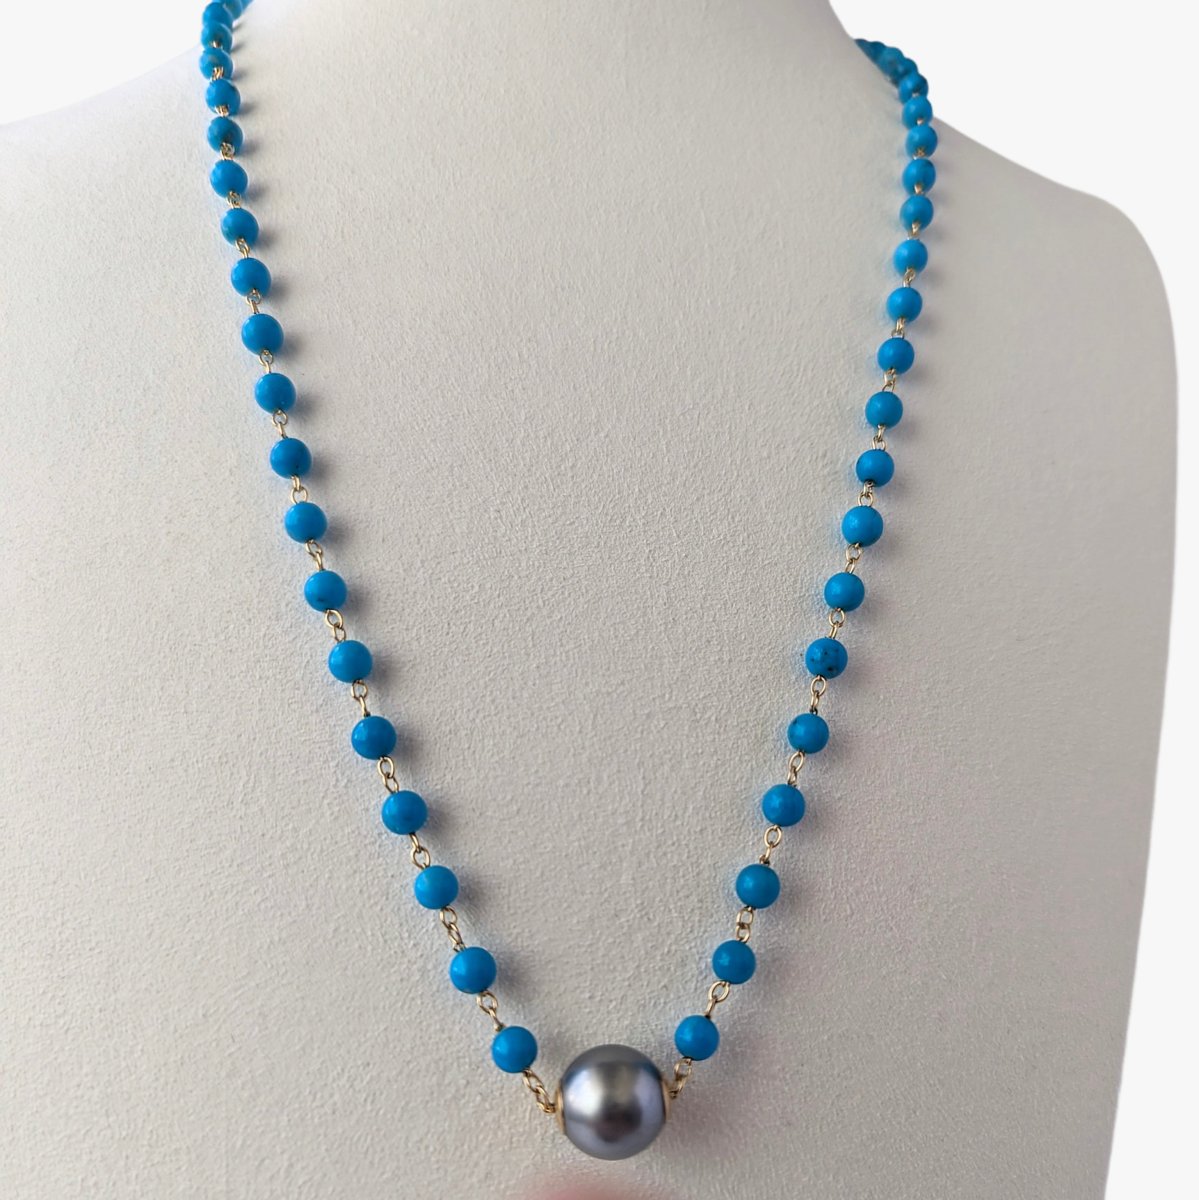 10-11mm Tahitian Pearl and Turquoise Beads Station Necklace - Marina Korneev FP